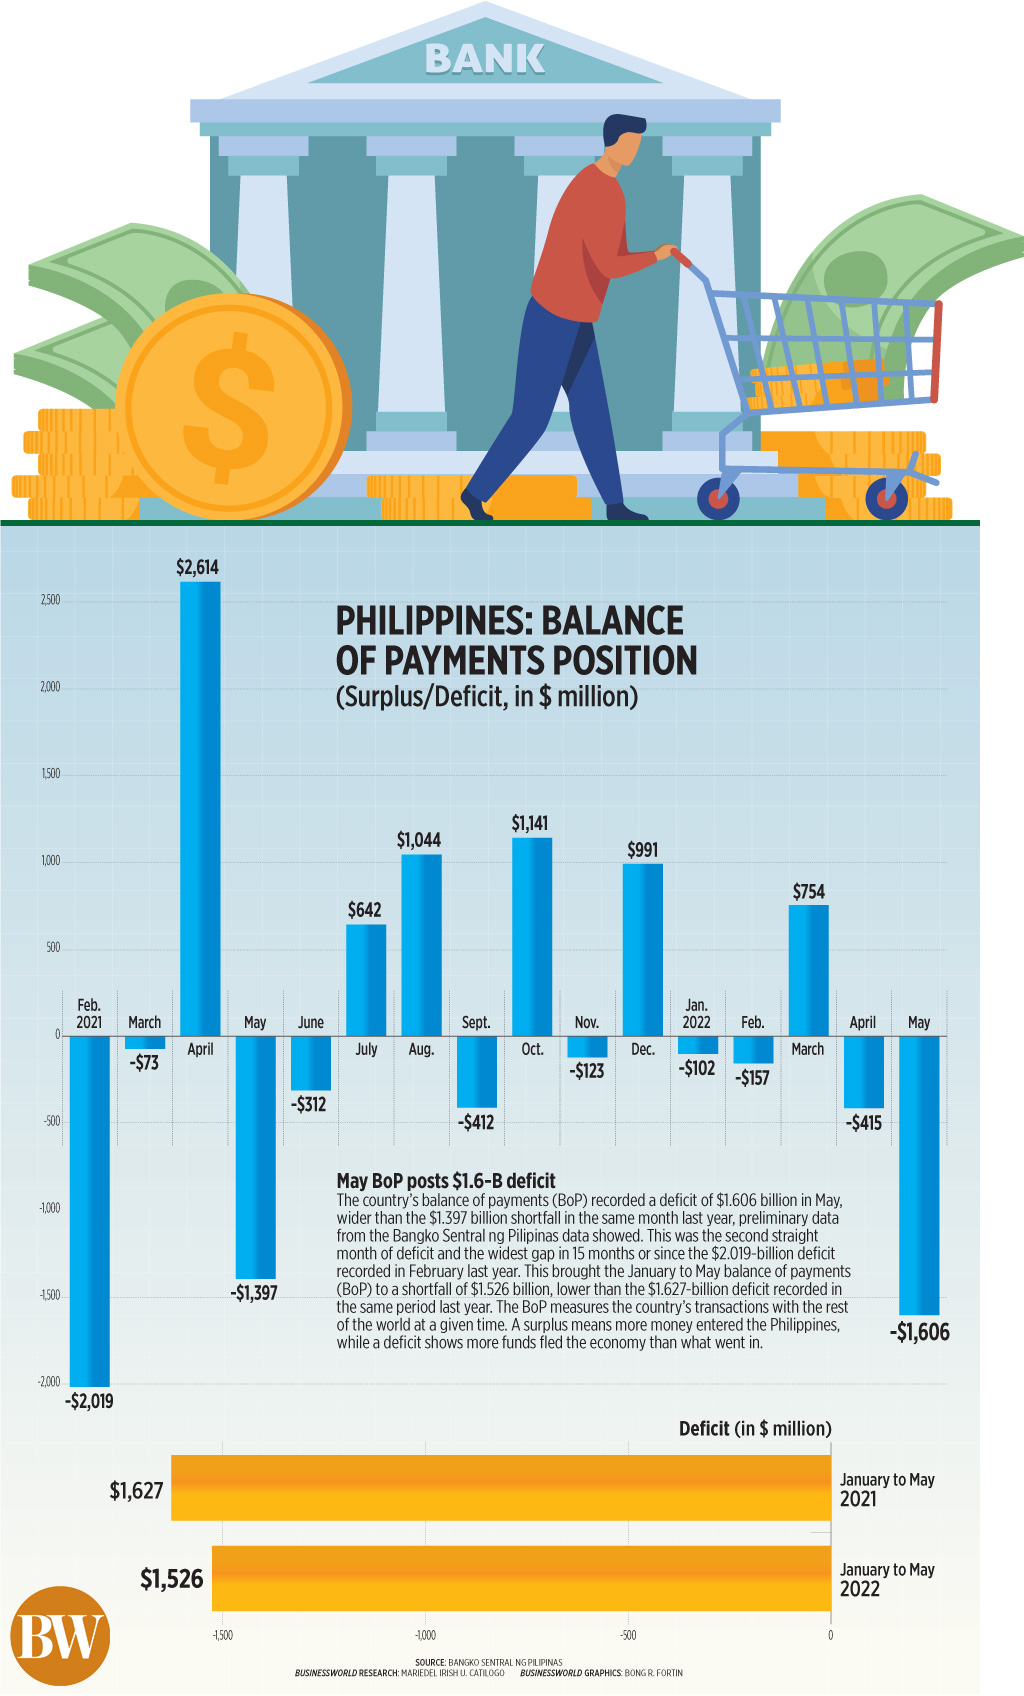 Philippines: Balance of payments position